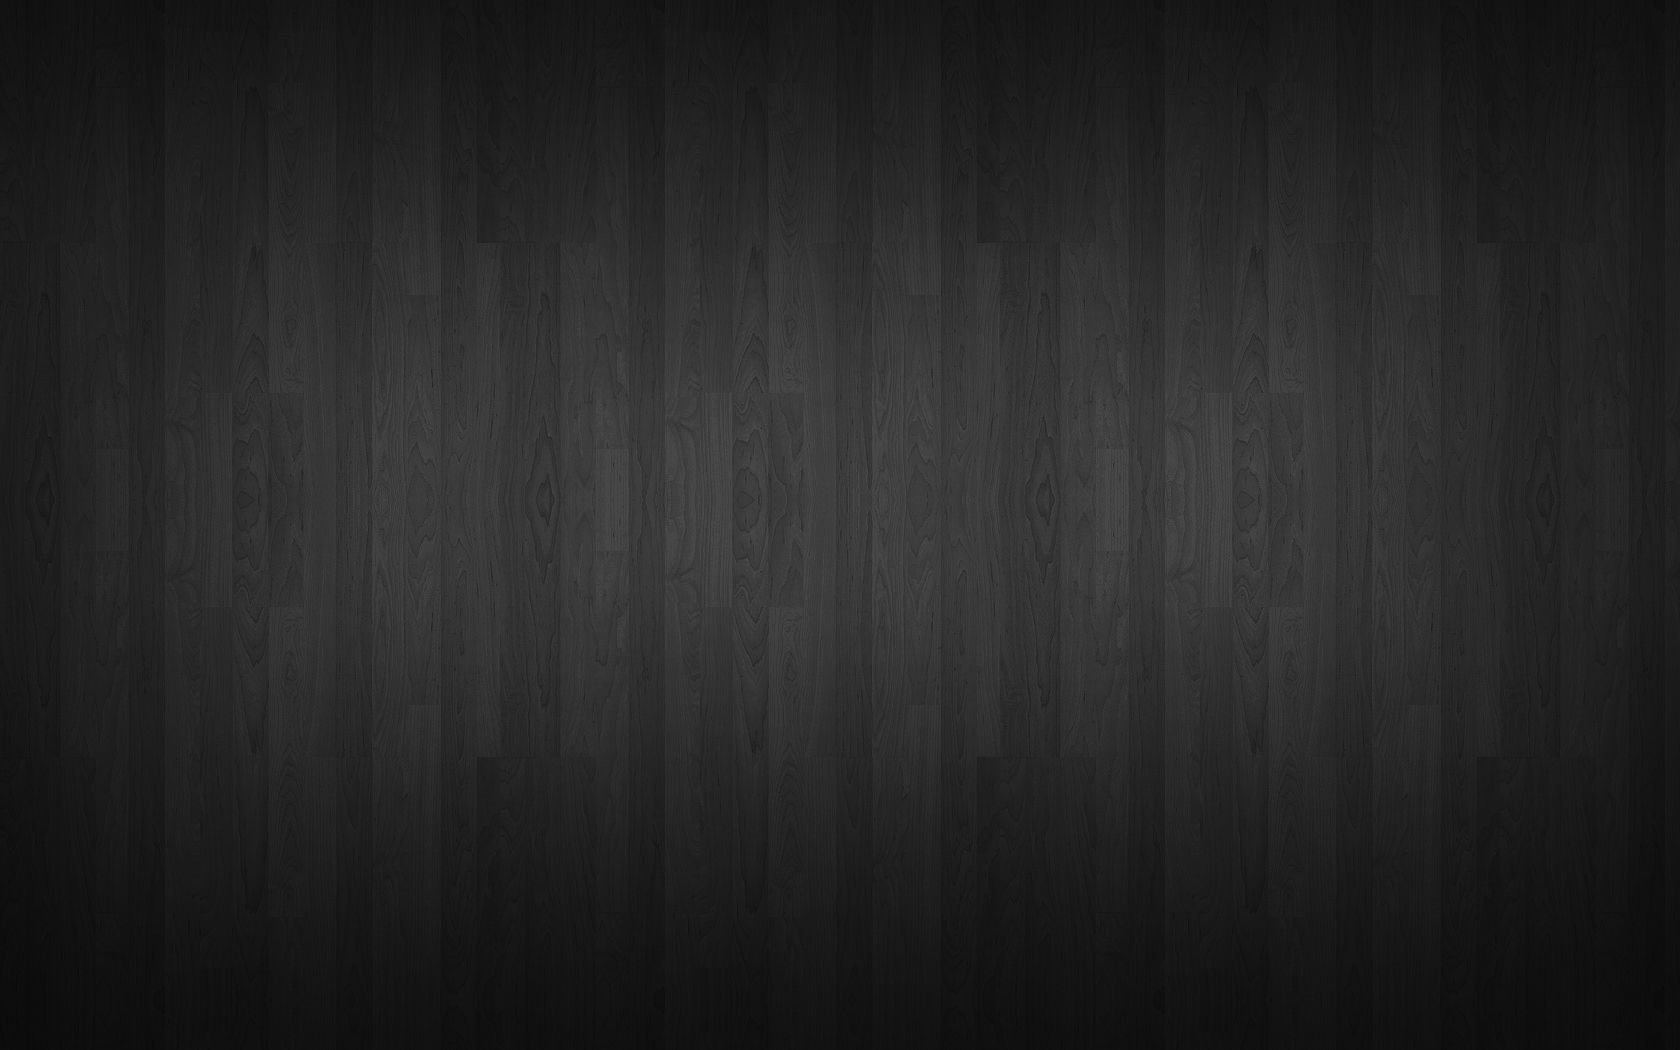 Give Your Desktop a Wooden Finish with These Wallpapers